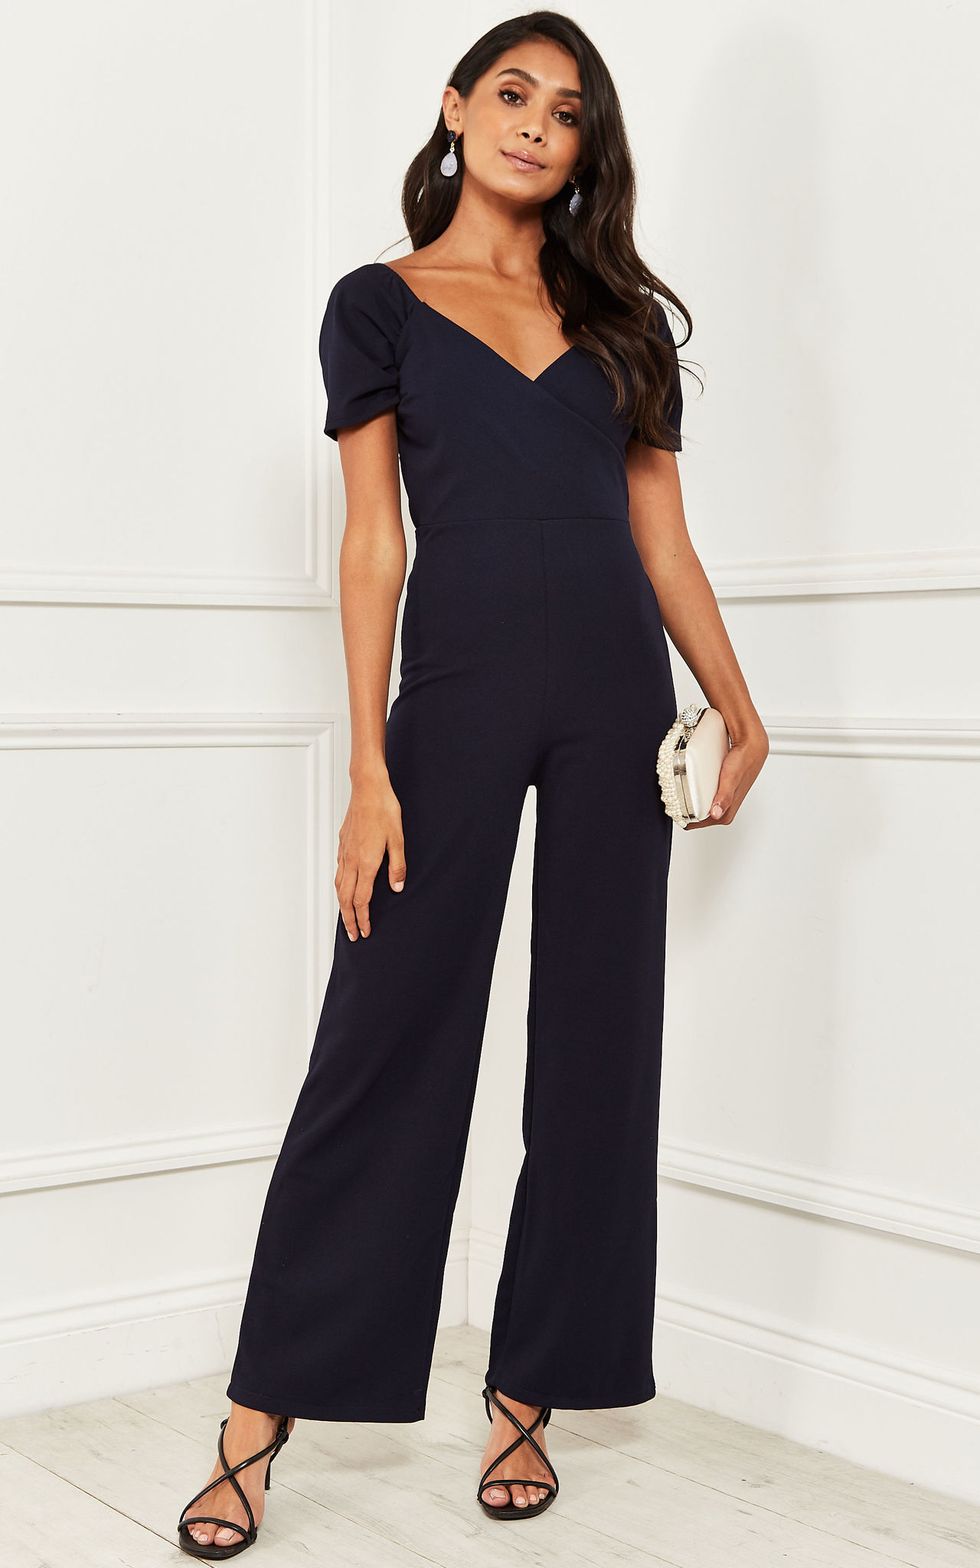 Christine Lampard shows us how to work a jumpsuit on Lorraine